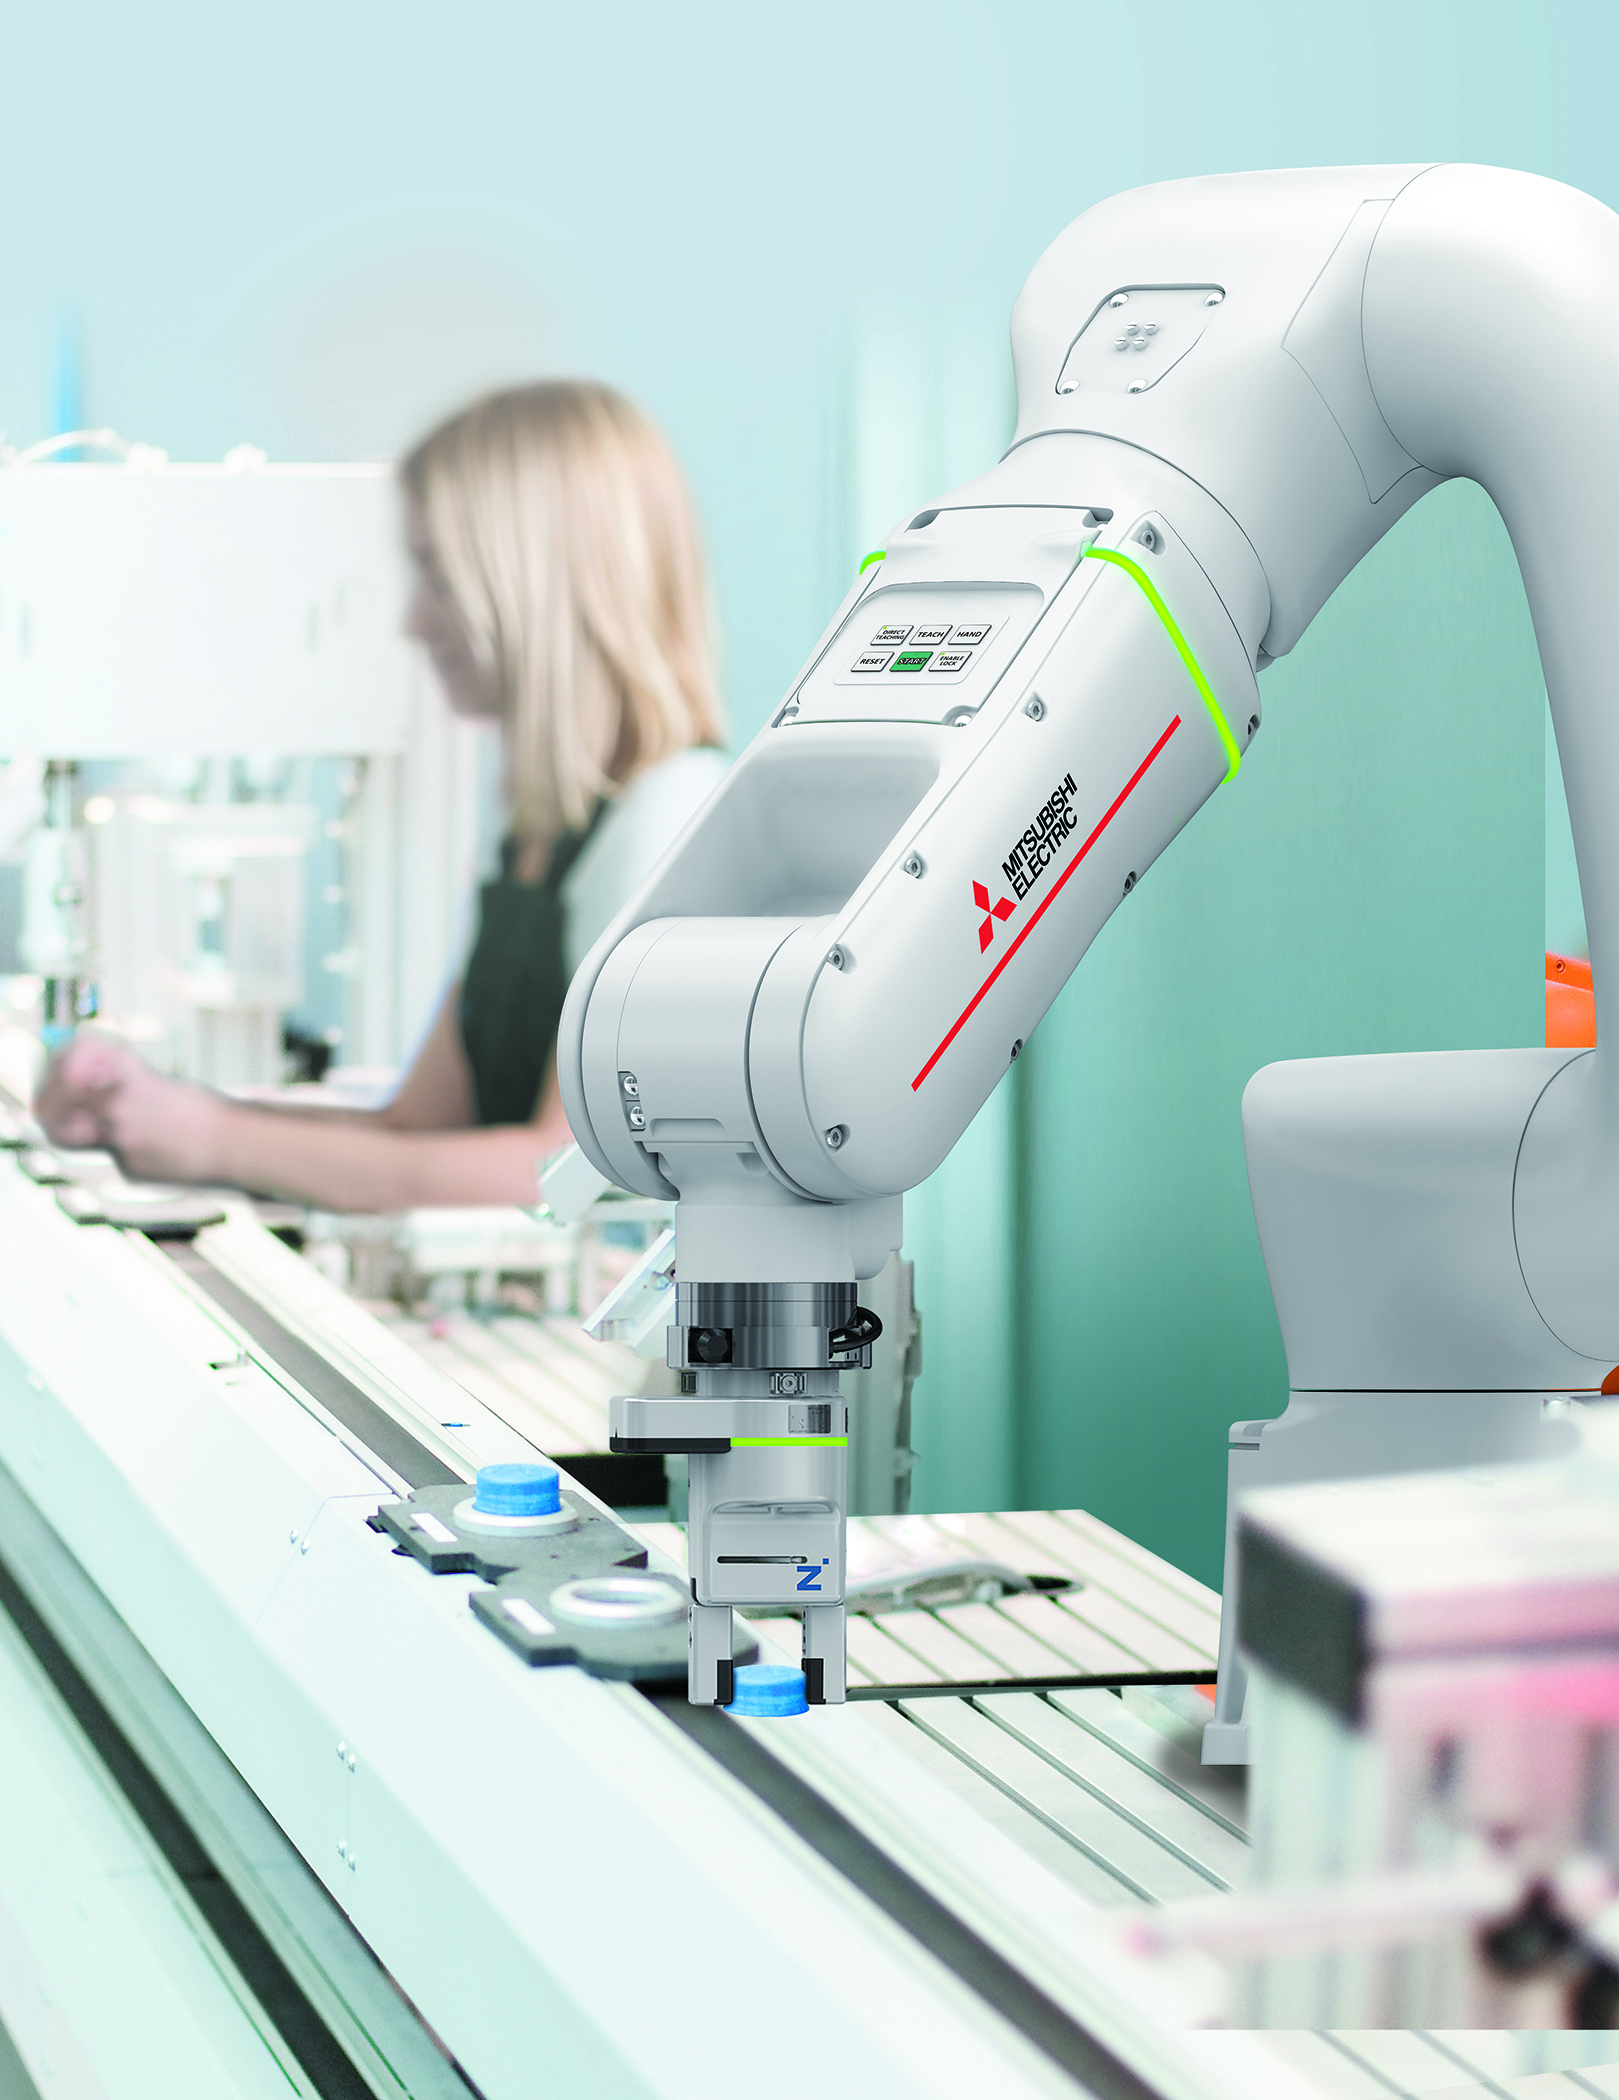 Able to work alongside human operators, cobots are a highly versatile option for businesses in the manufacturing, processing and assembly sectors. [Source: Mitsubishi Electric Corporation, Japan]